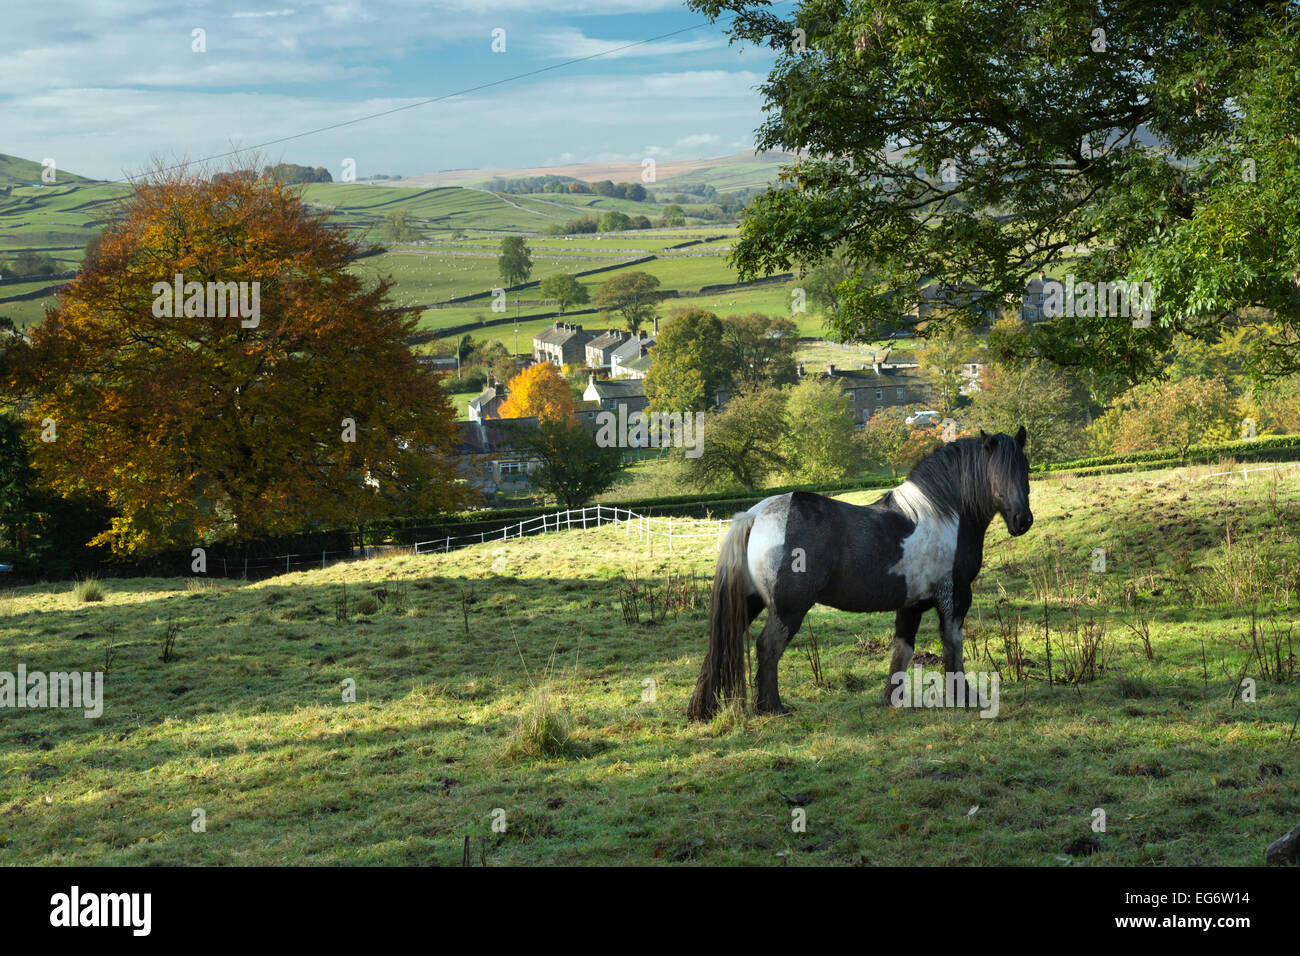 Hebden Dorf in Wharfedale, The Yorkshire Dales, England. Stockfoto